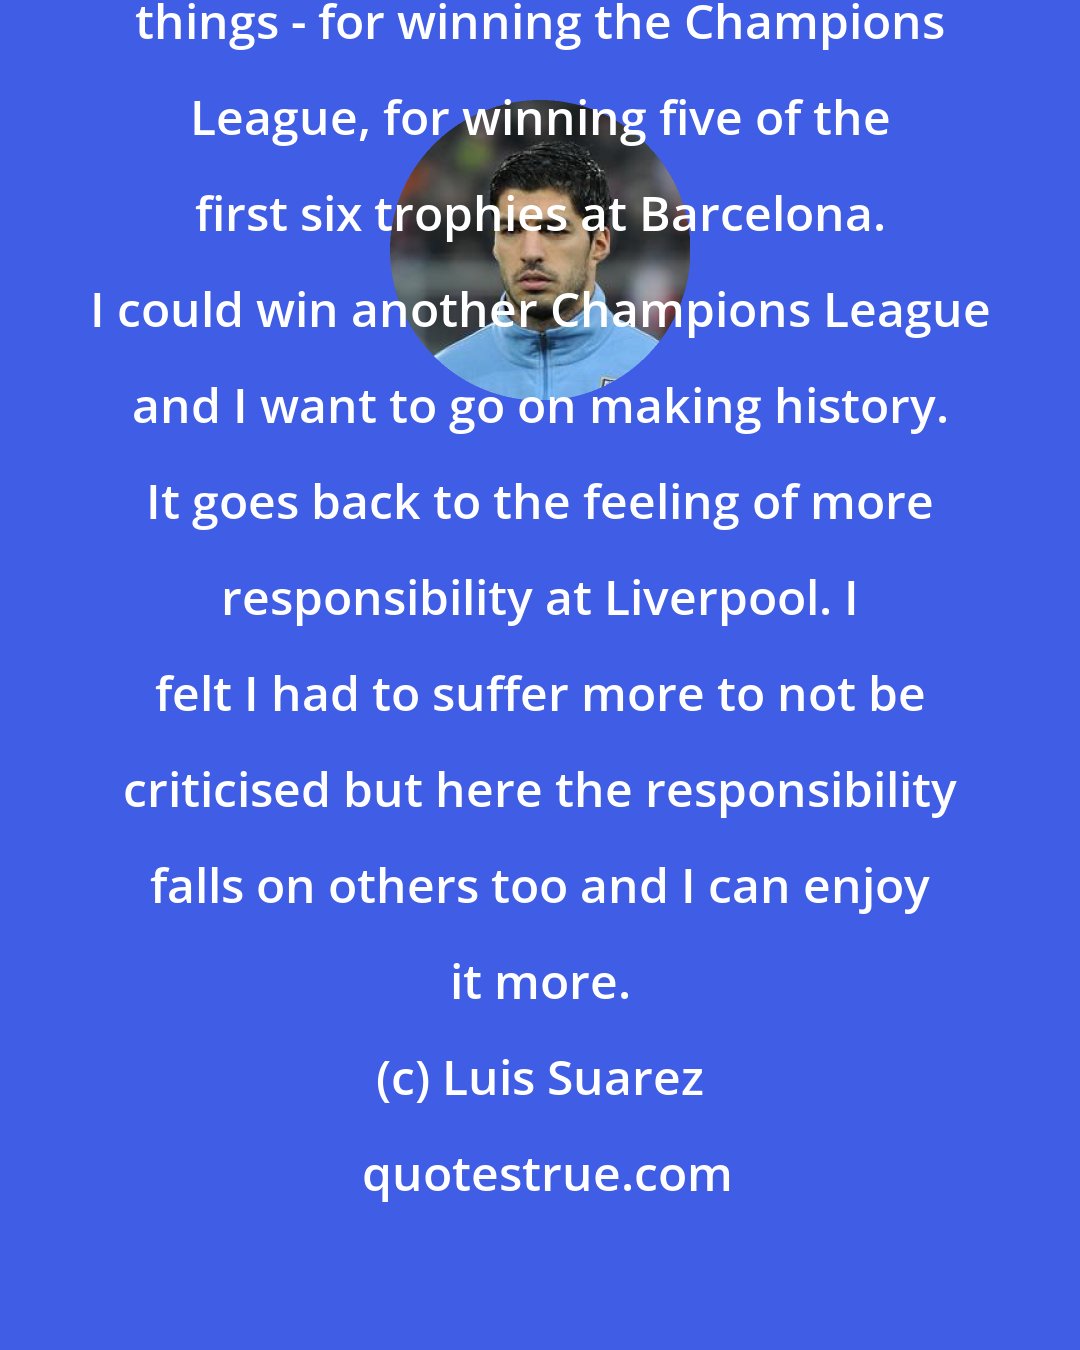 Luis Suarez: I want to be remembered for the good things - for winning the Champions League, for winning five of the first six trophies at Barcelona. I could win another Champions League and I want to go on making history. It goes back to the feeling of more responsibility at Liverpool. I felt I had to suffer more to not be criticised but here the responsibility falls on others too and I can enjoy it more.